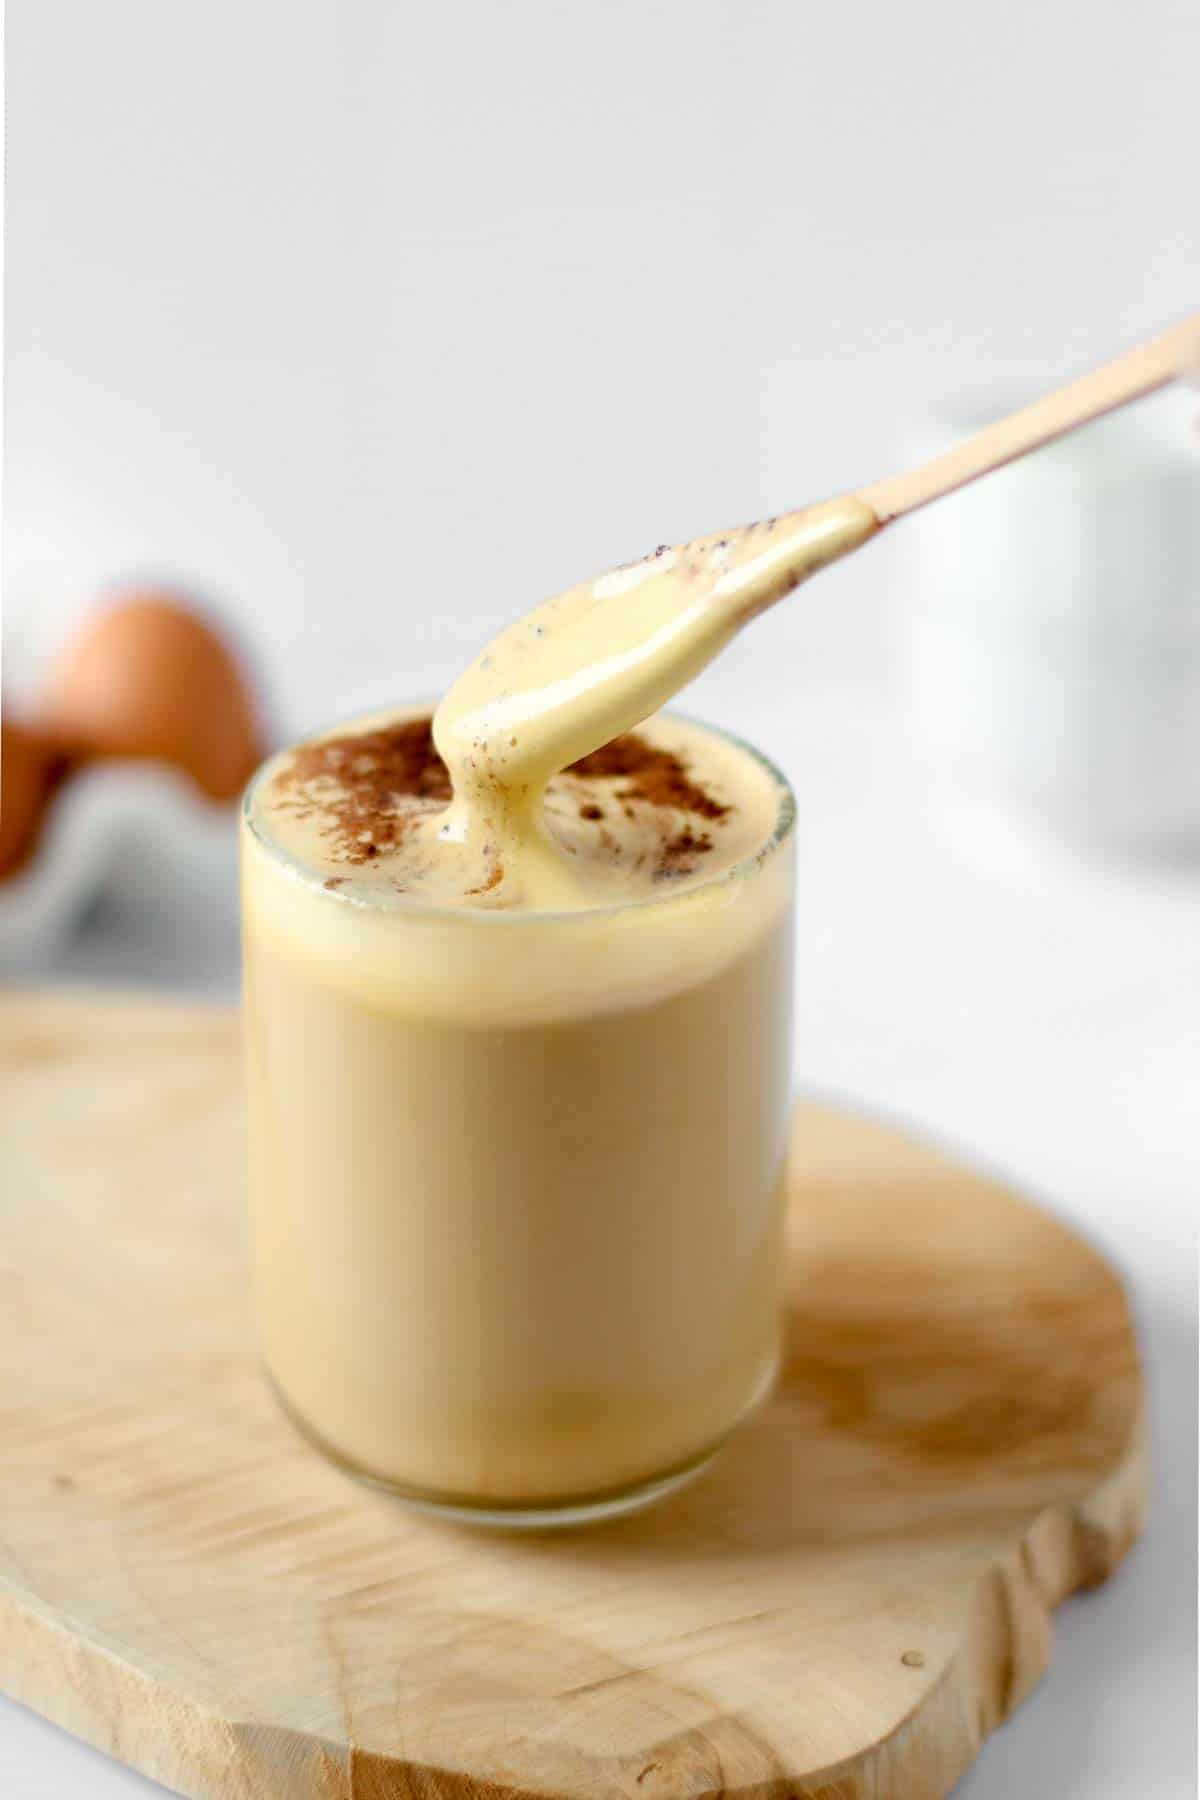 Vietnamese egg coffee made with an espresso shot, milk and foam made with an egg yolk